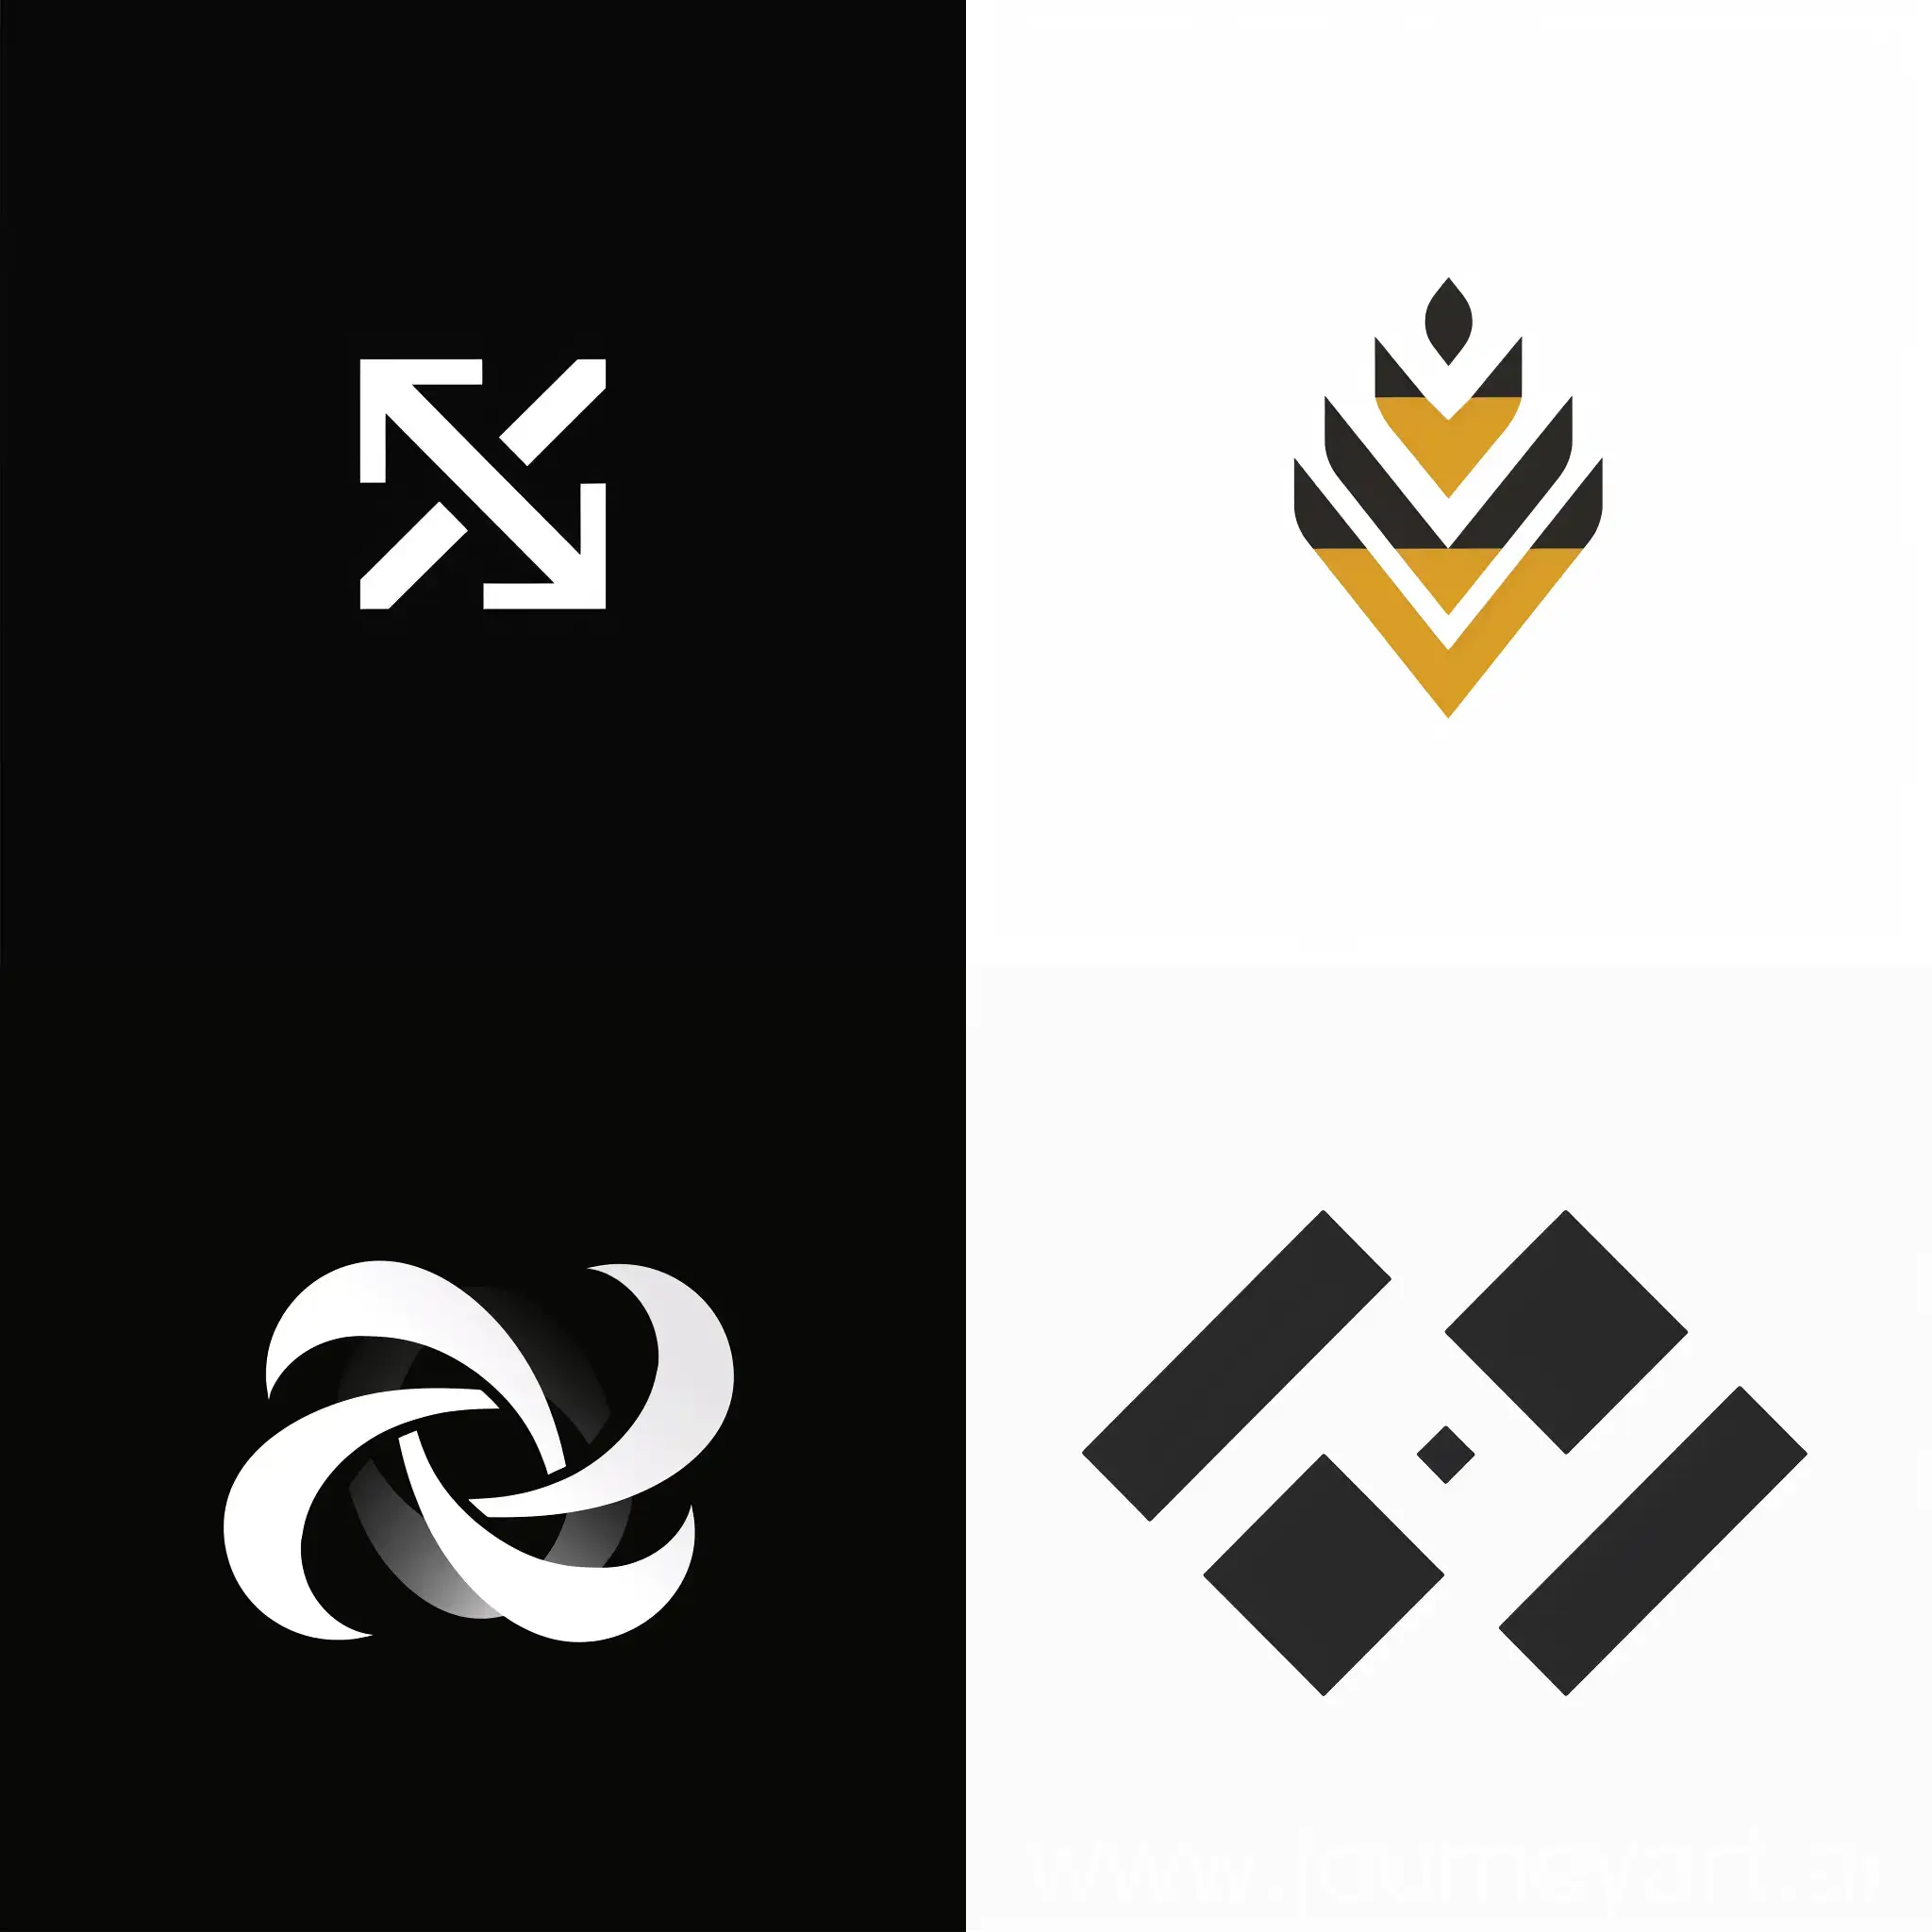 a clean, modern-looking logo, Incorporate a simple icon or symbol